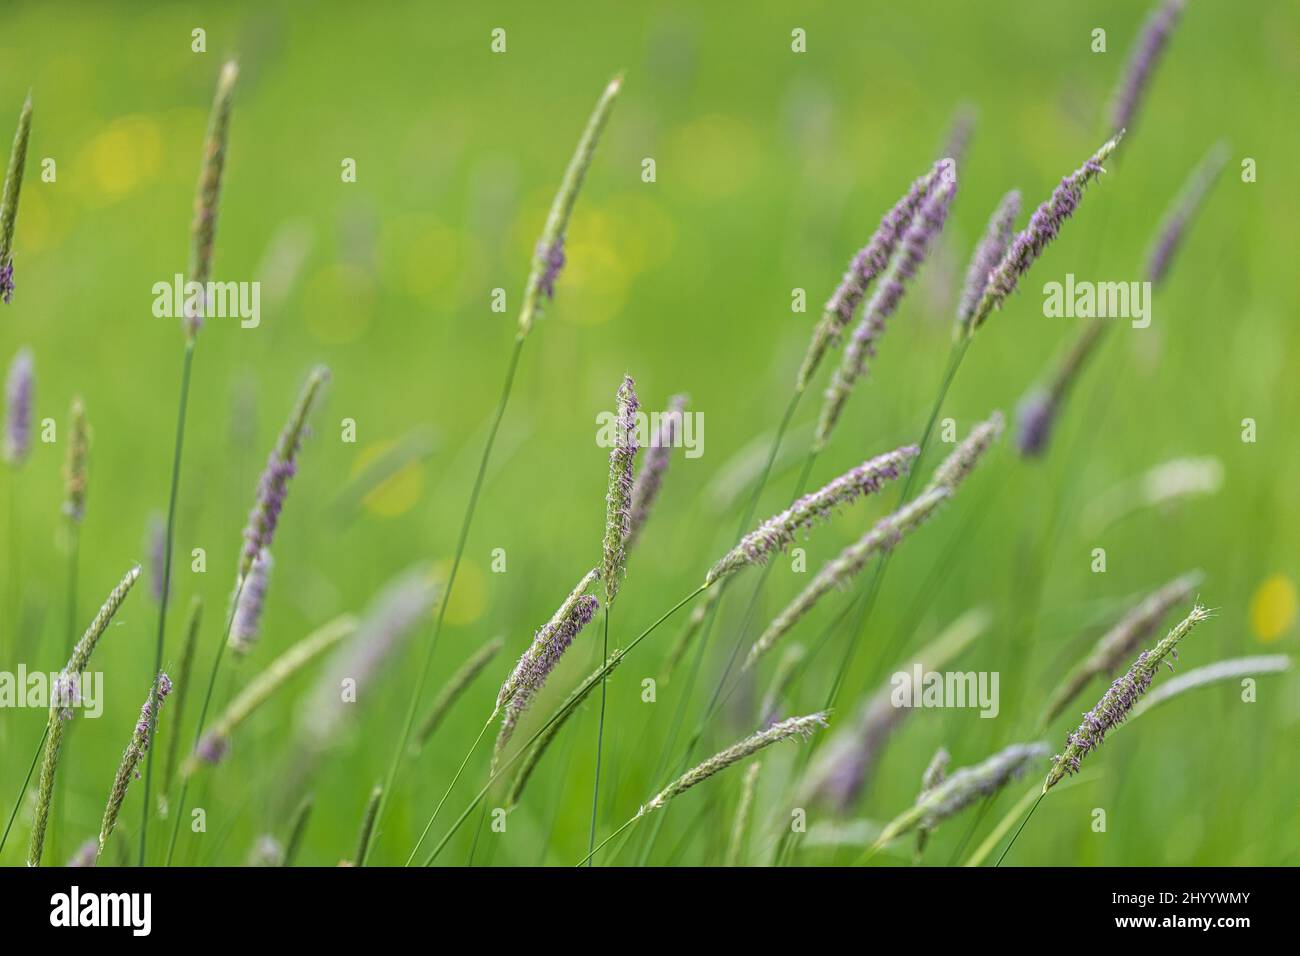 Blades of Alopecurus pratensis, also known as the meadow foxtail, in close-up view on a blurred meadow background Stock Photo